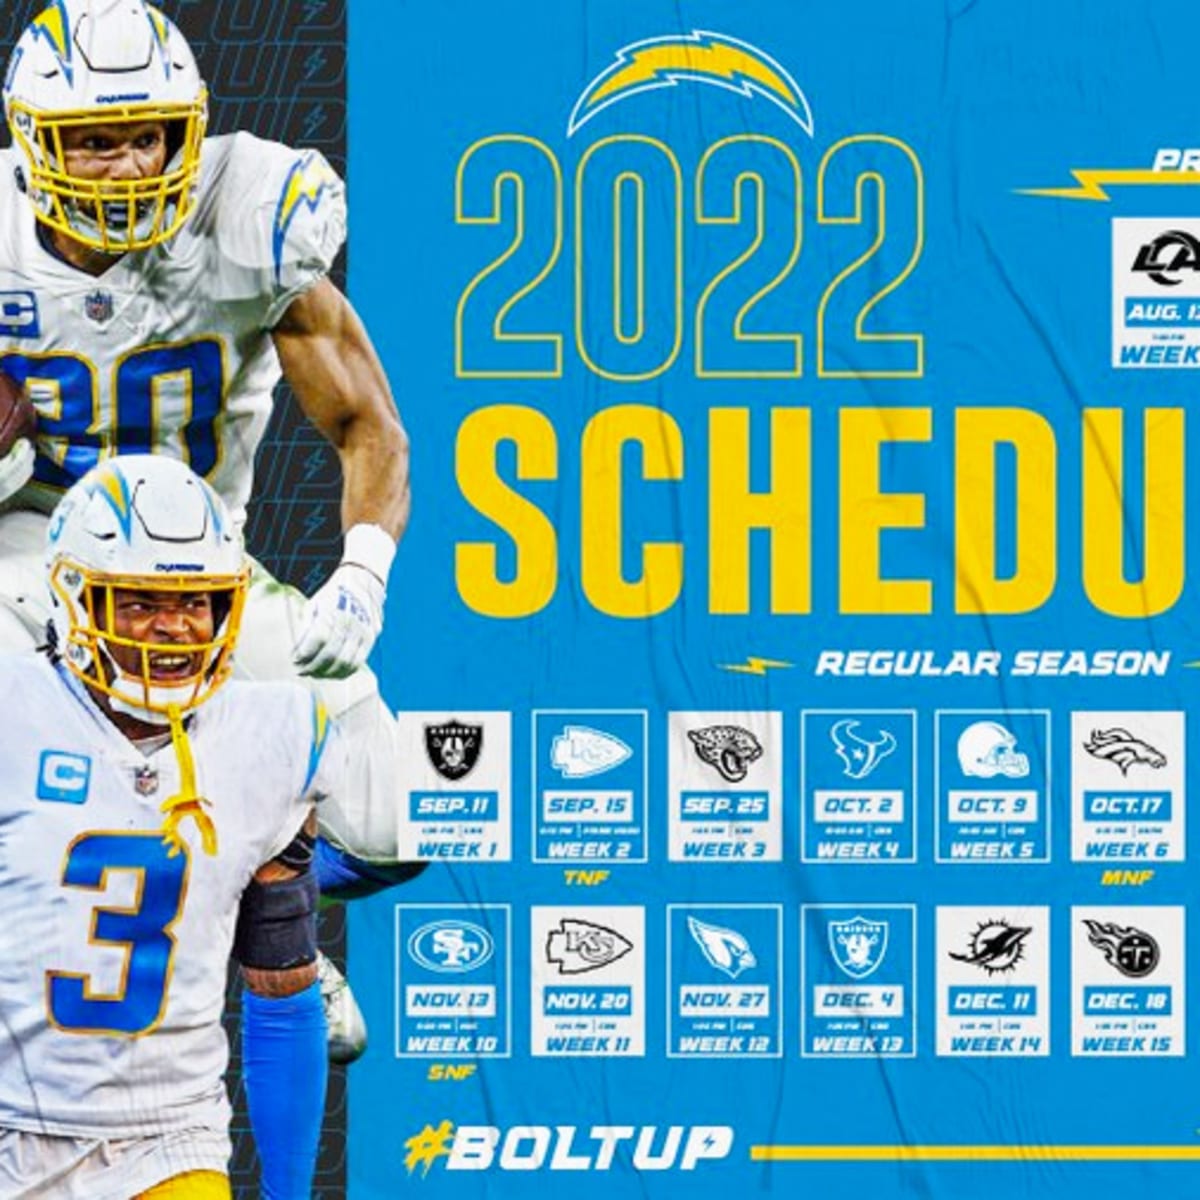 la chargers schedule